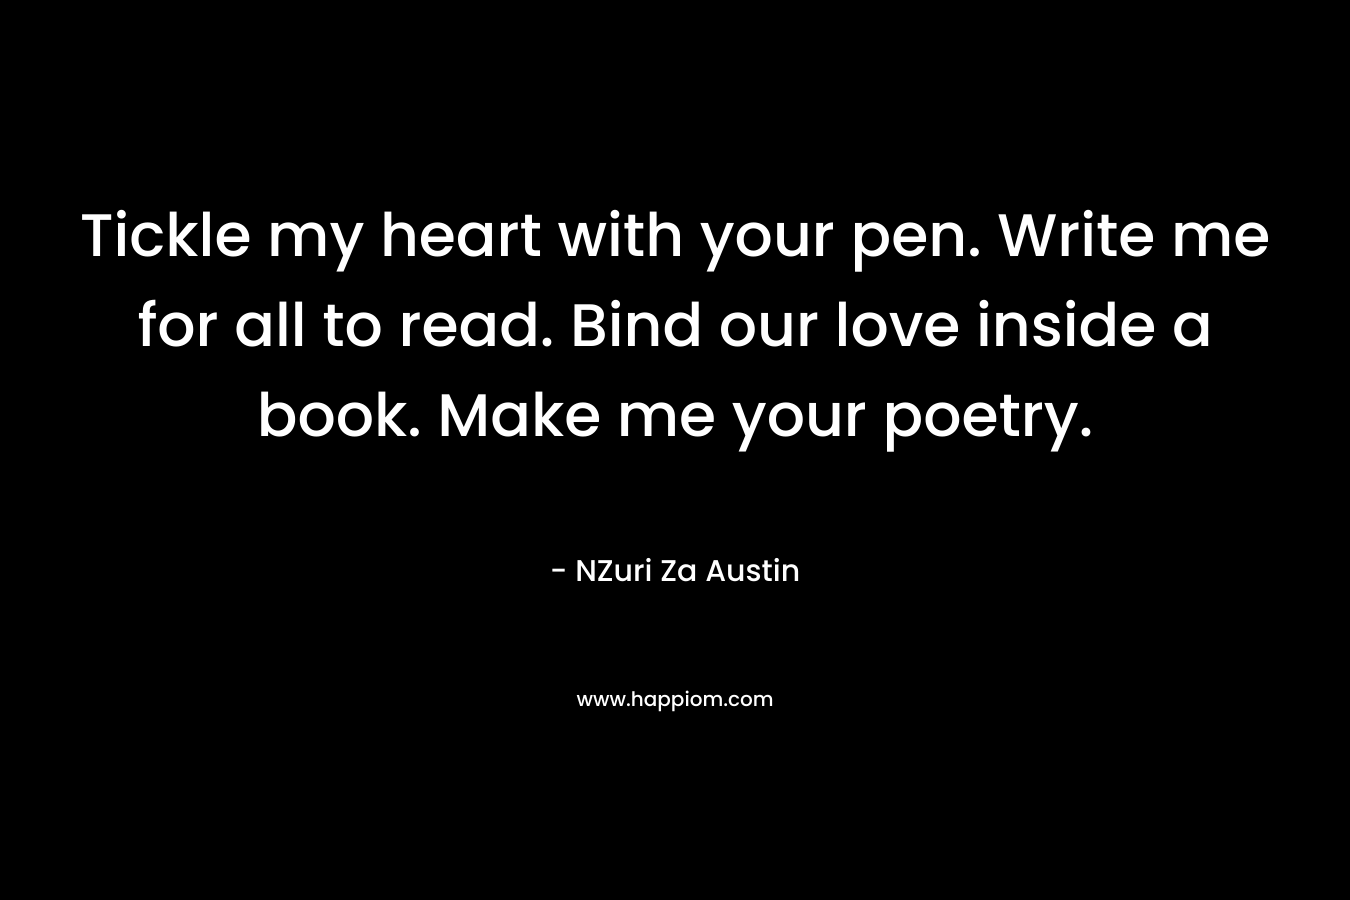 Tickle my heart with your pen. Write me for all to read. Bind our love inside a book. Make me your poetry.